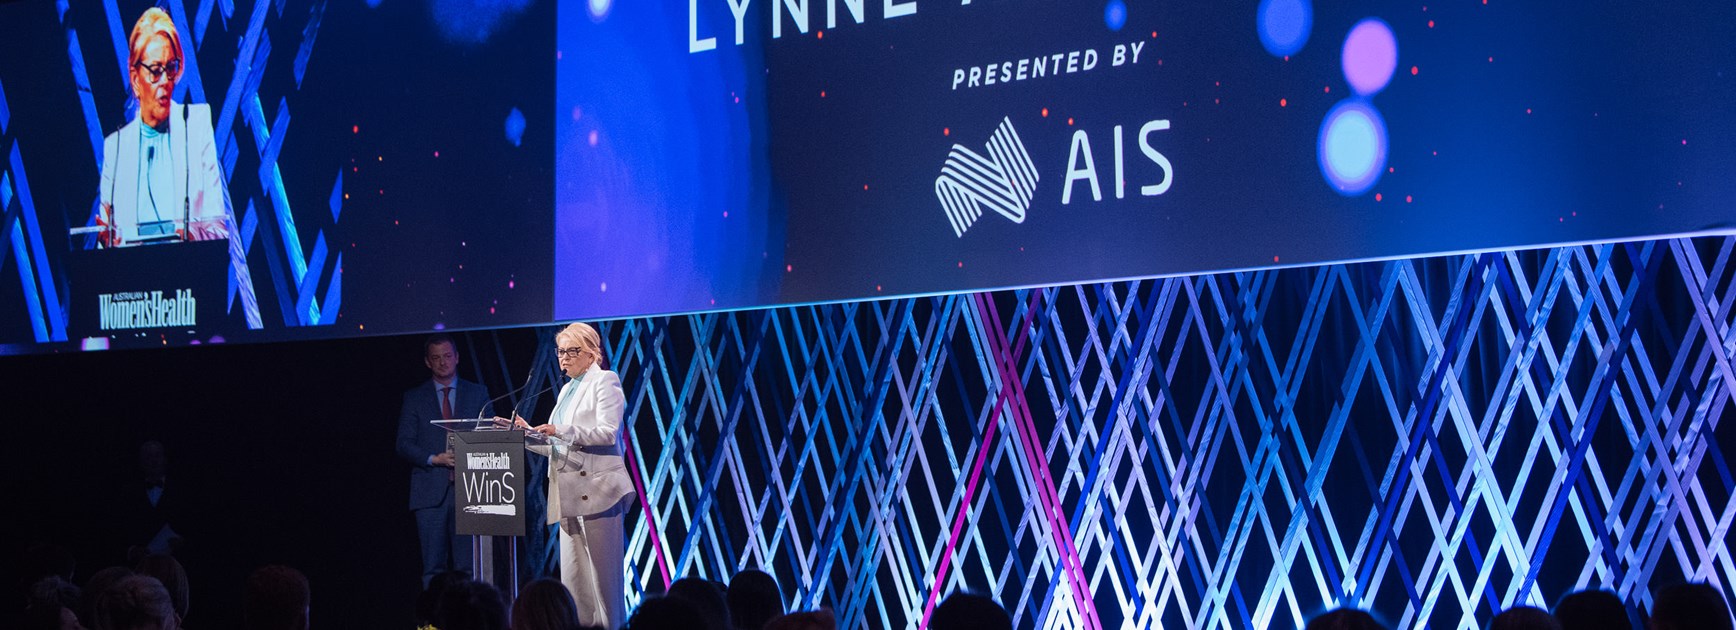 Lynne Anderson receives the prestigious Women’s Health Award for Person of Sporting Influence